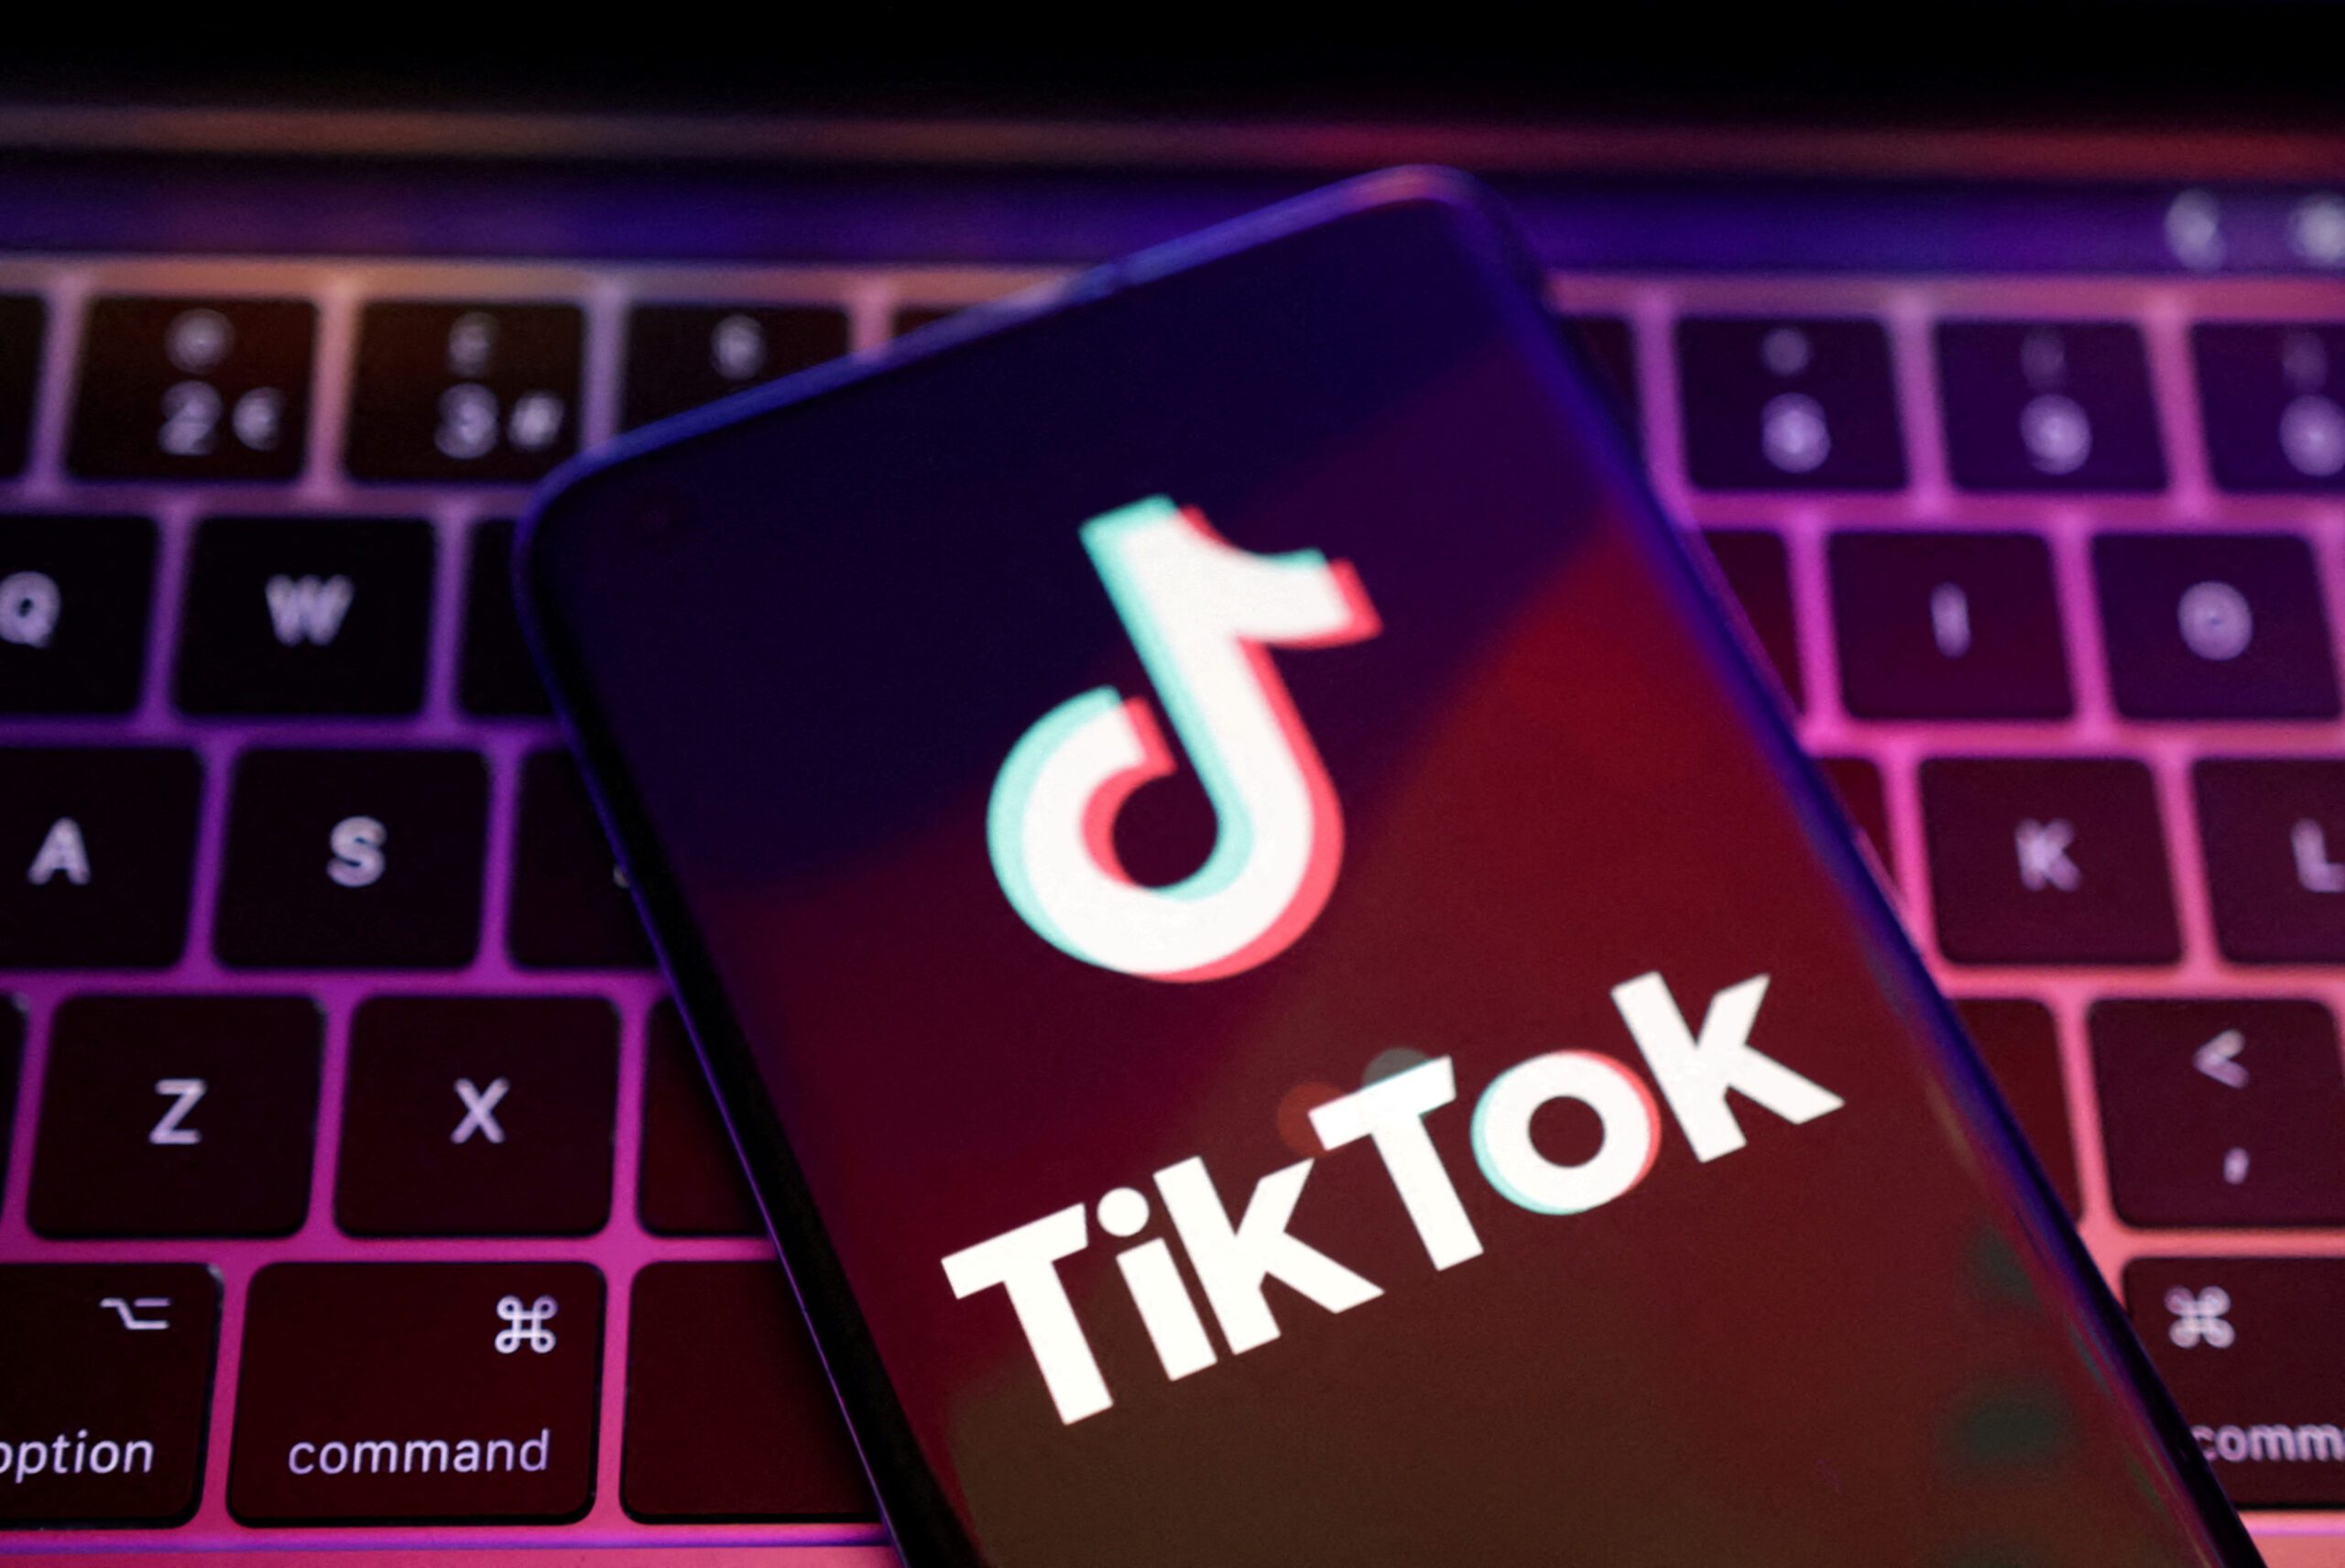 Lawmakers seek to force ByteDance to divest TikTok or face US ban